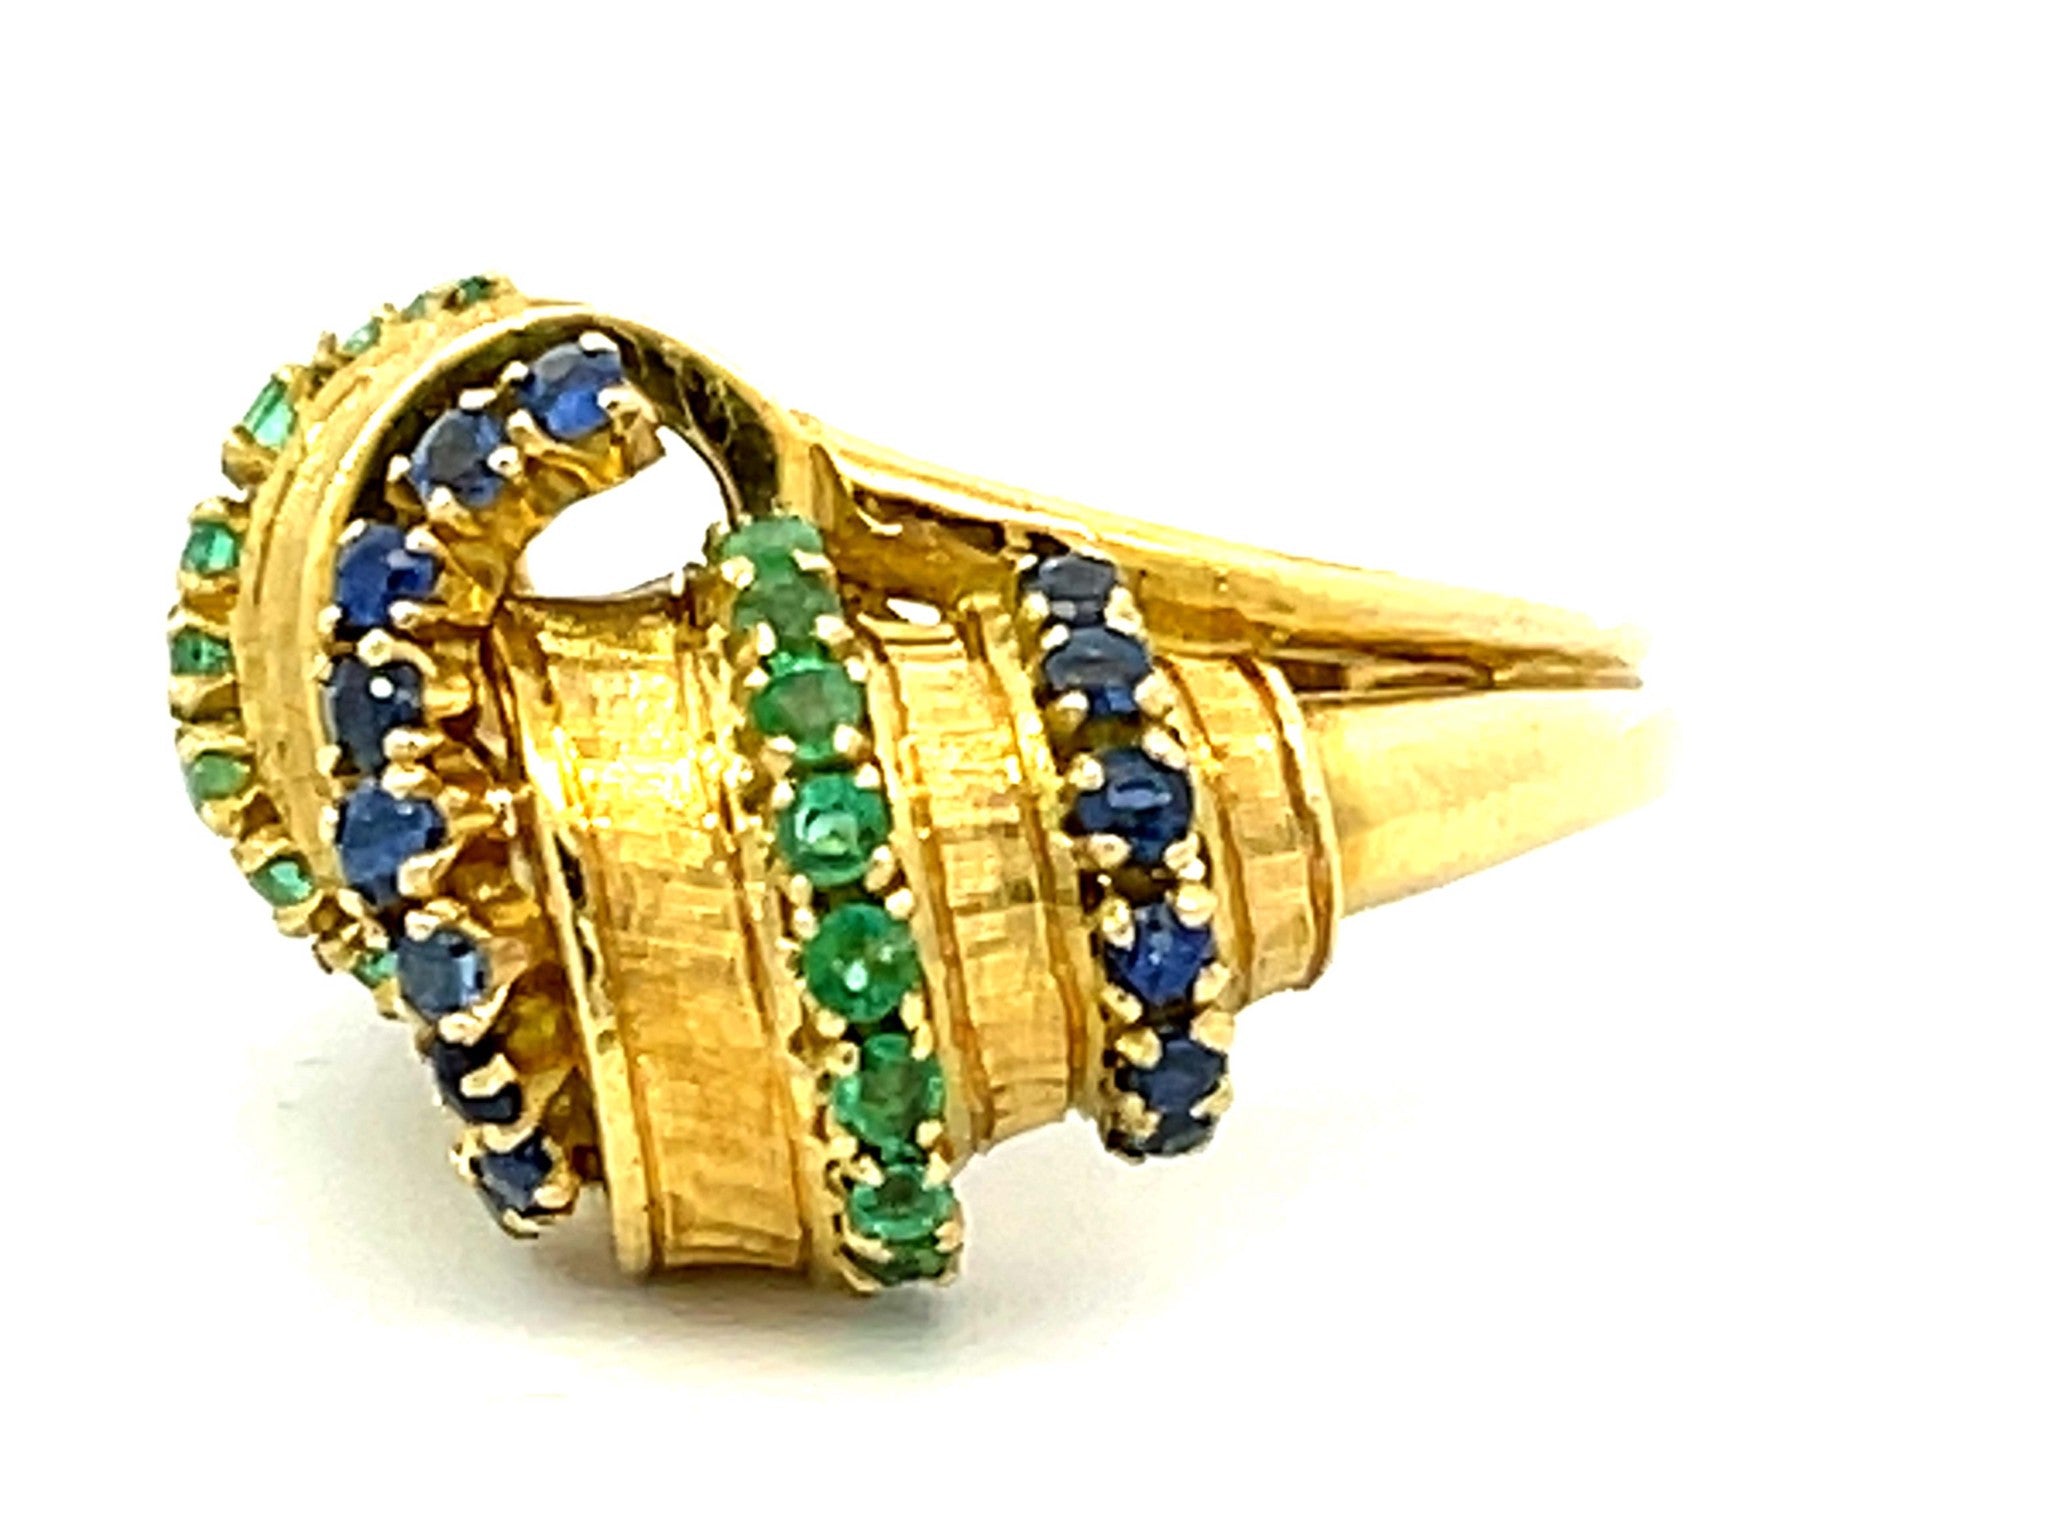 Alternating Sapphire and Emerald Rows Vintage Ring in 18k Yellow Gold